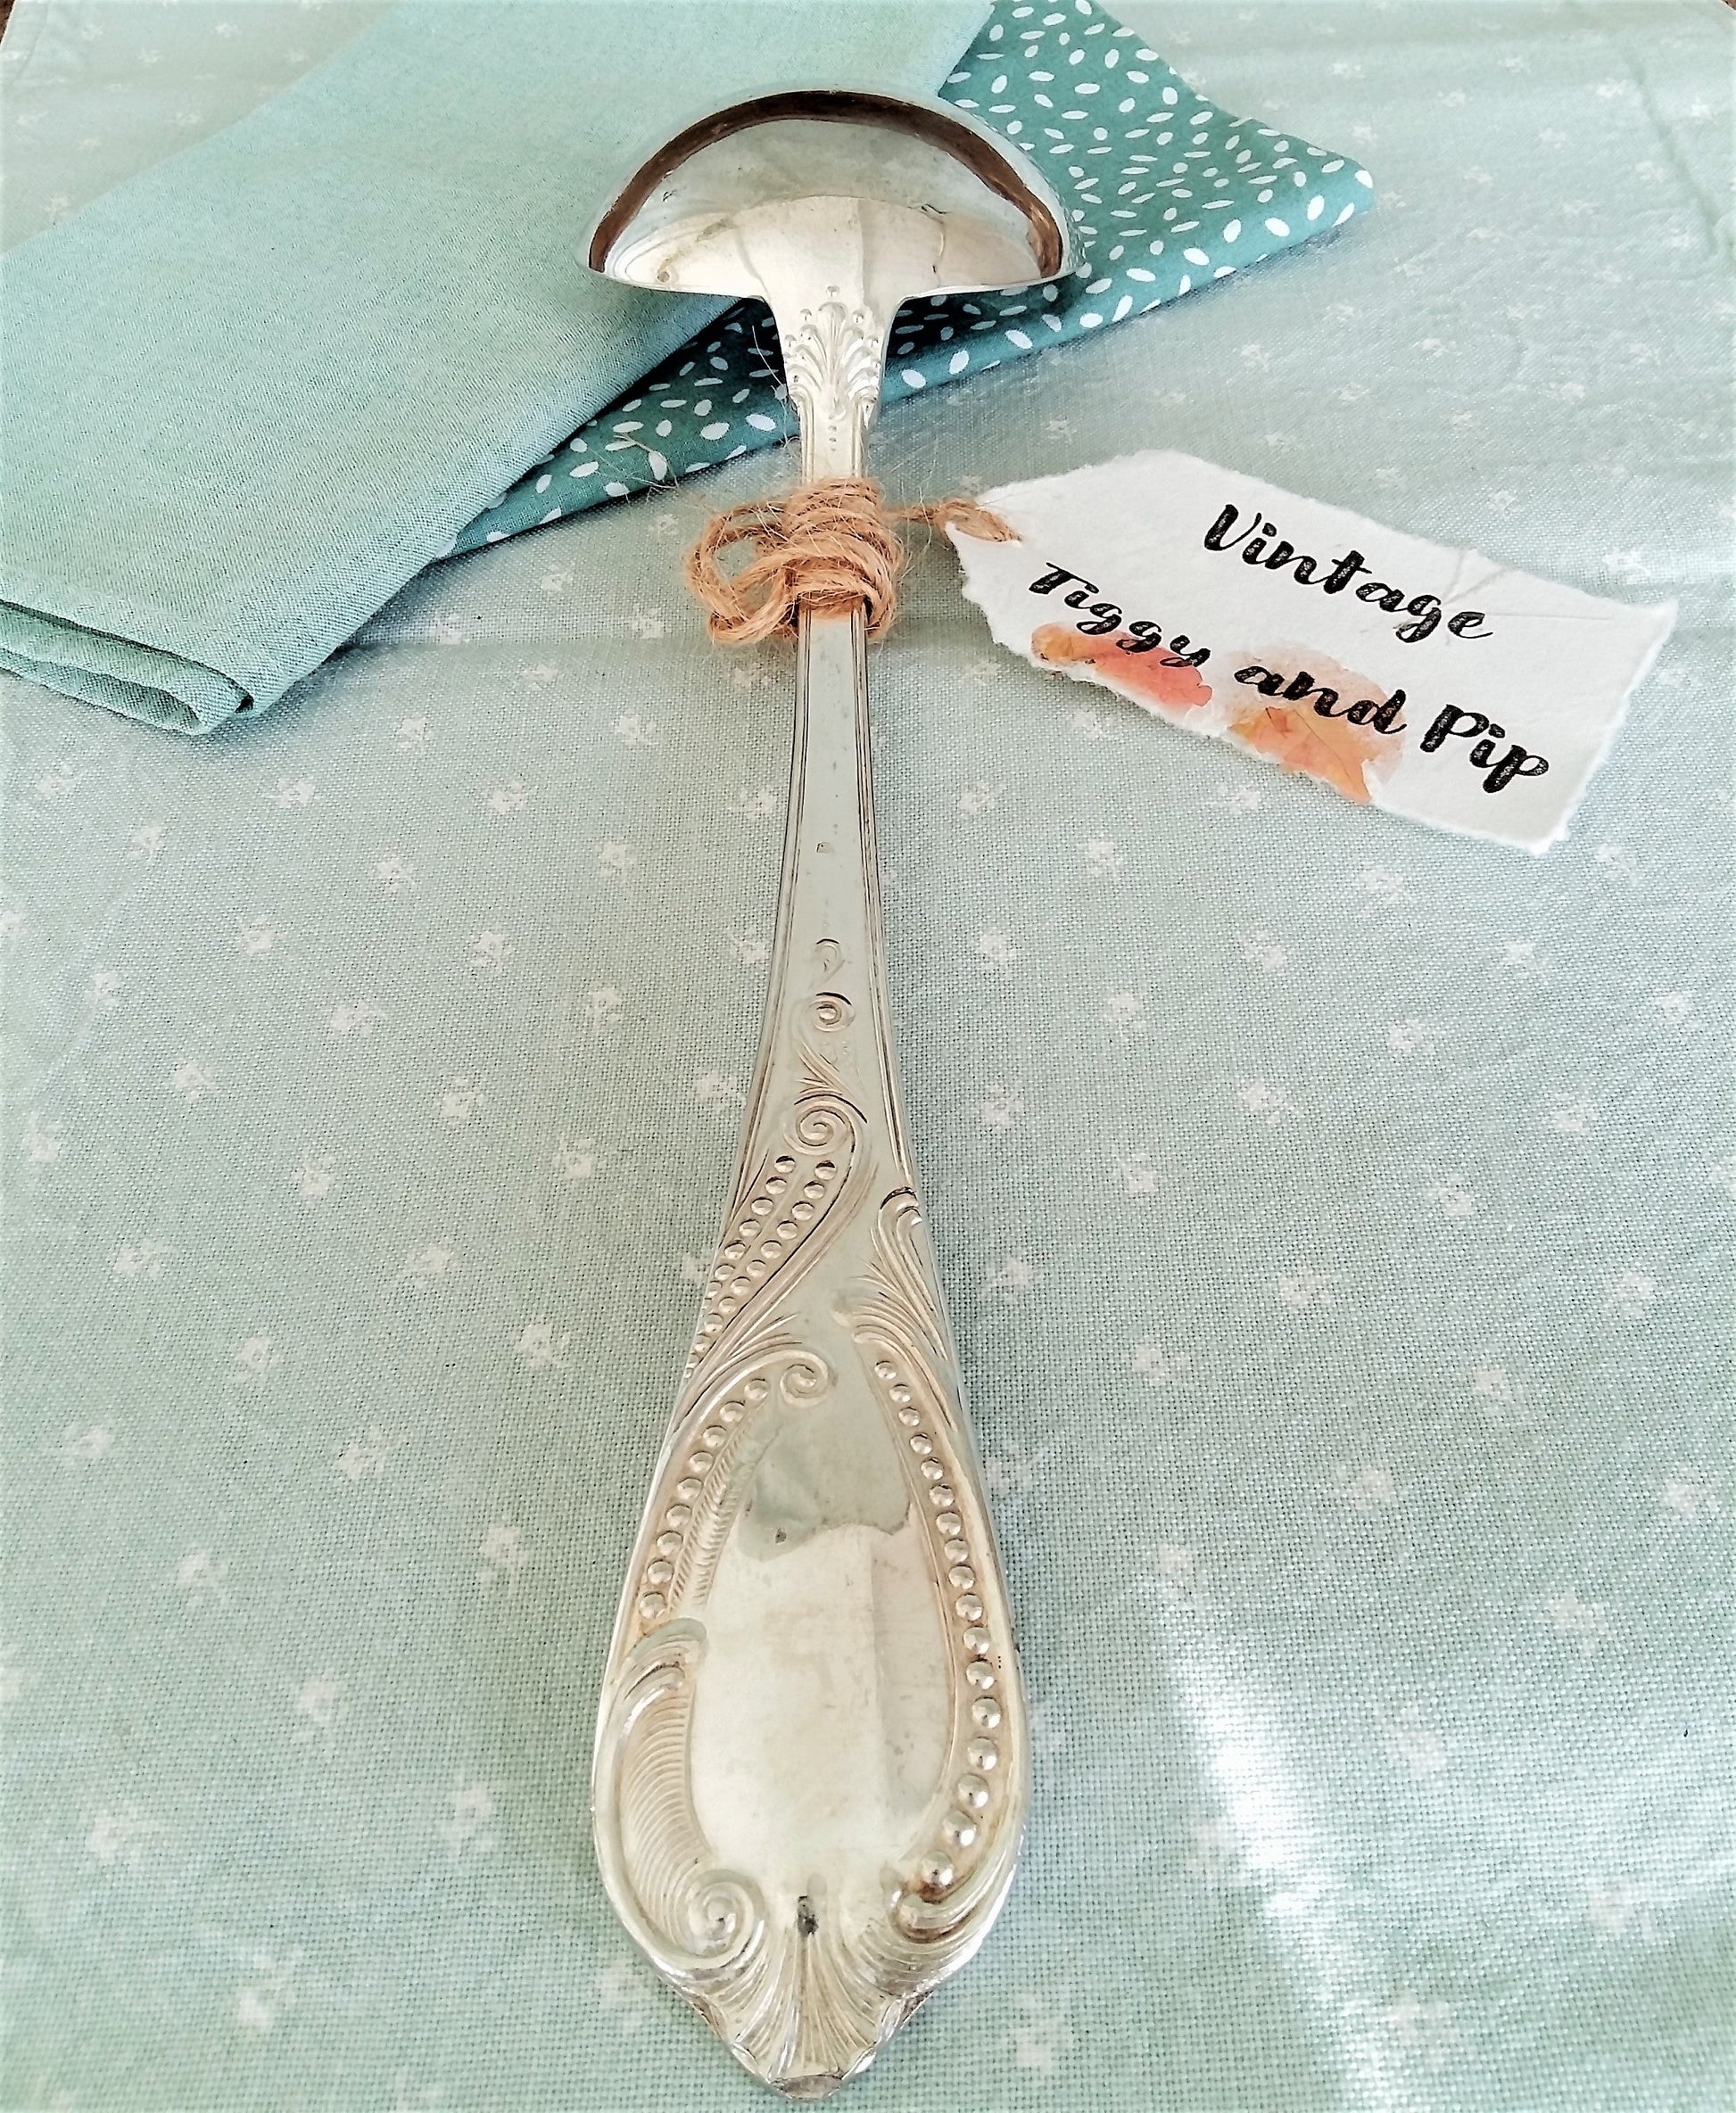 Silver Plated, Vintage Ladle. Large, Heavy, Ornate Silver Plate Ladle. from Tiggy & Pip - €62.00! Shop now at Tiggy and Pip